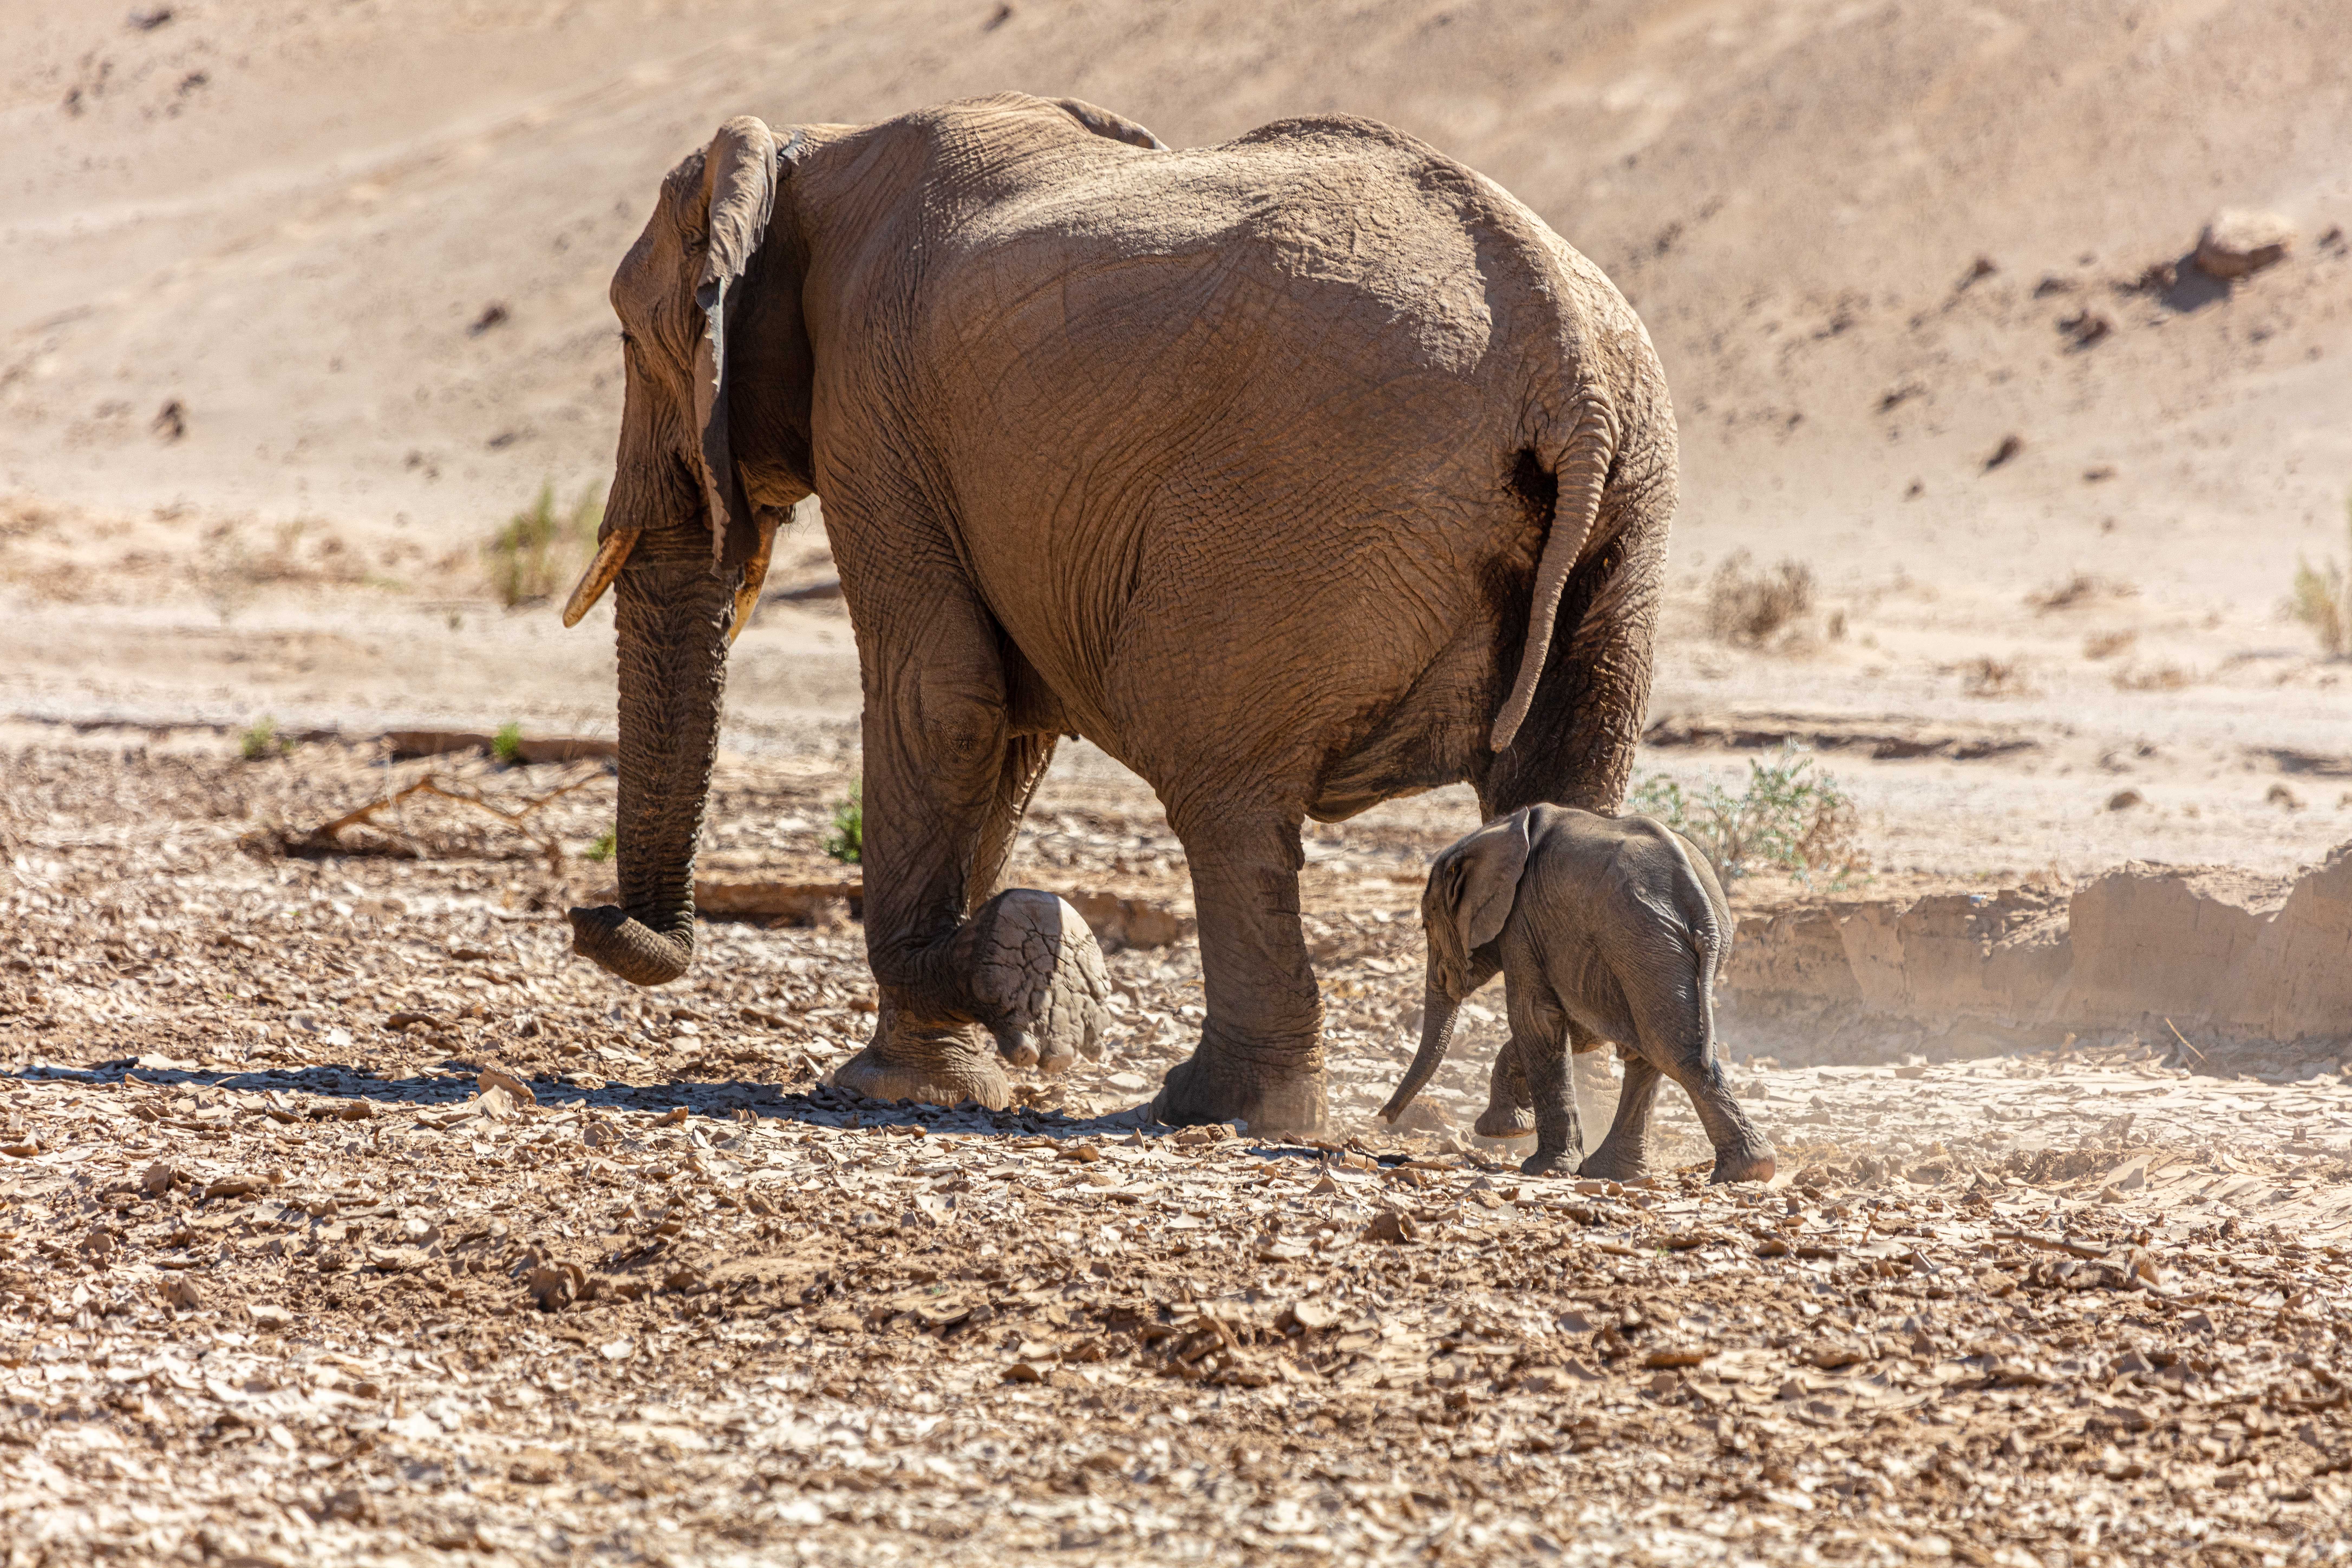 elephants facts about moms and babies